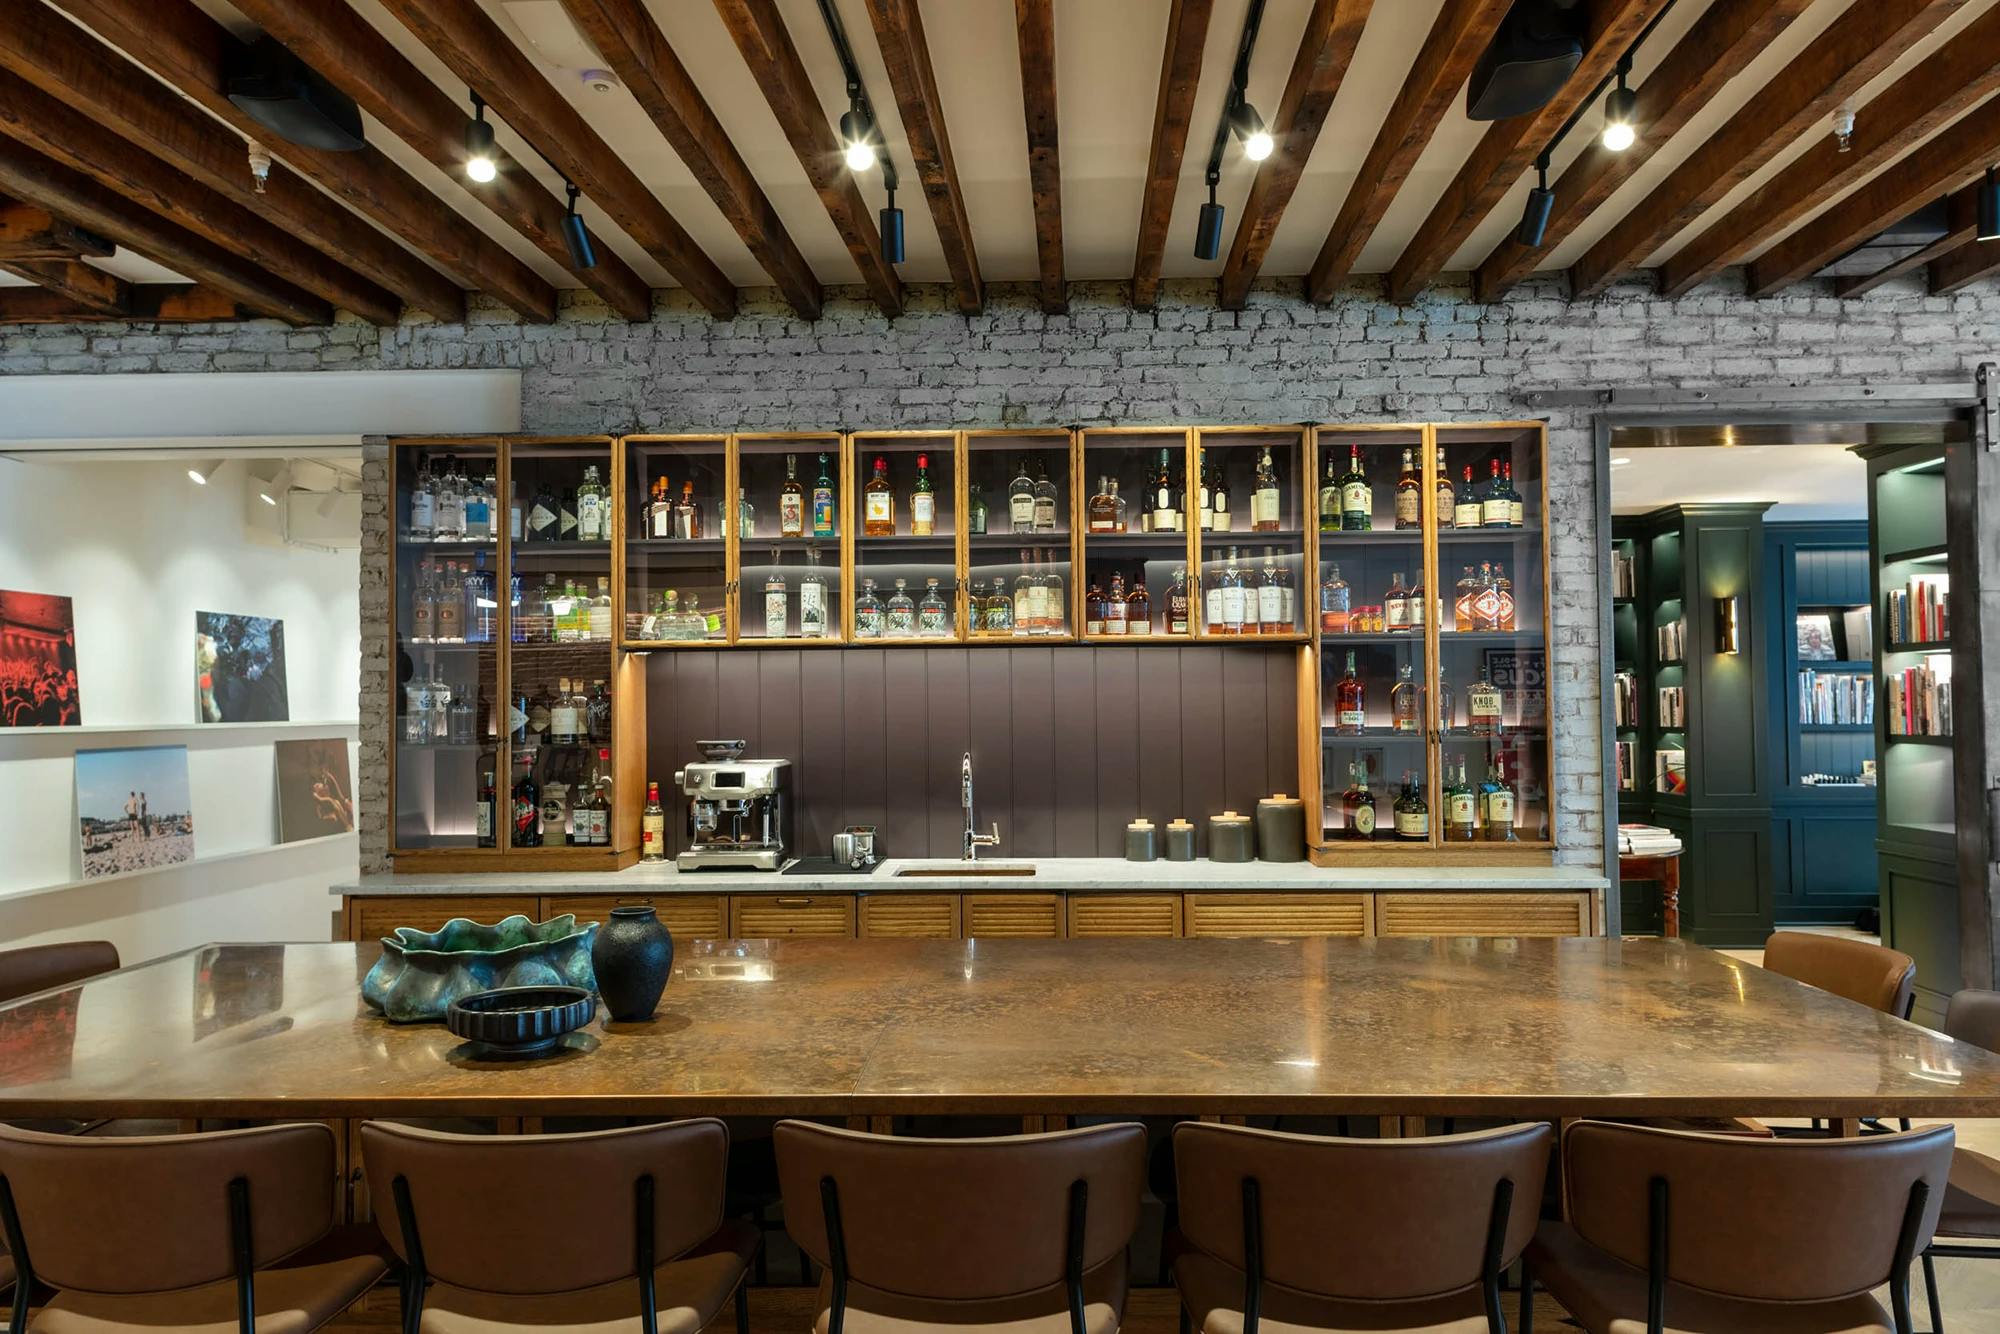 The bar area at FIG with a large central island and glass liquor cabinets.